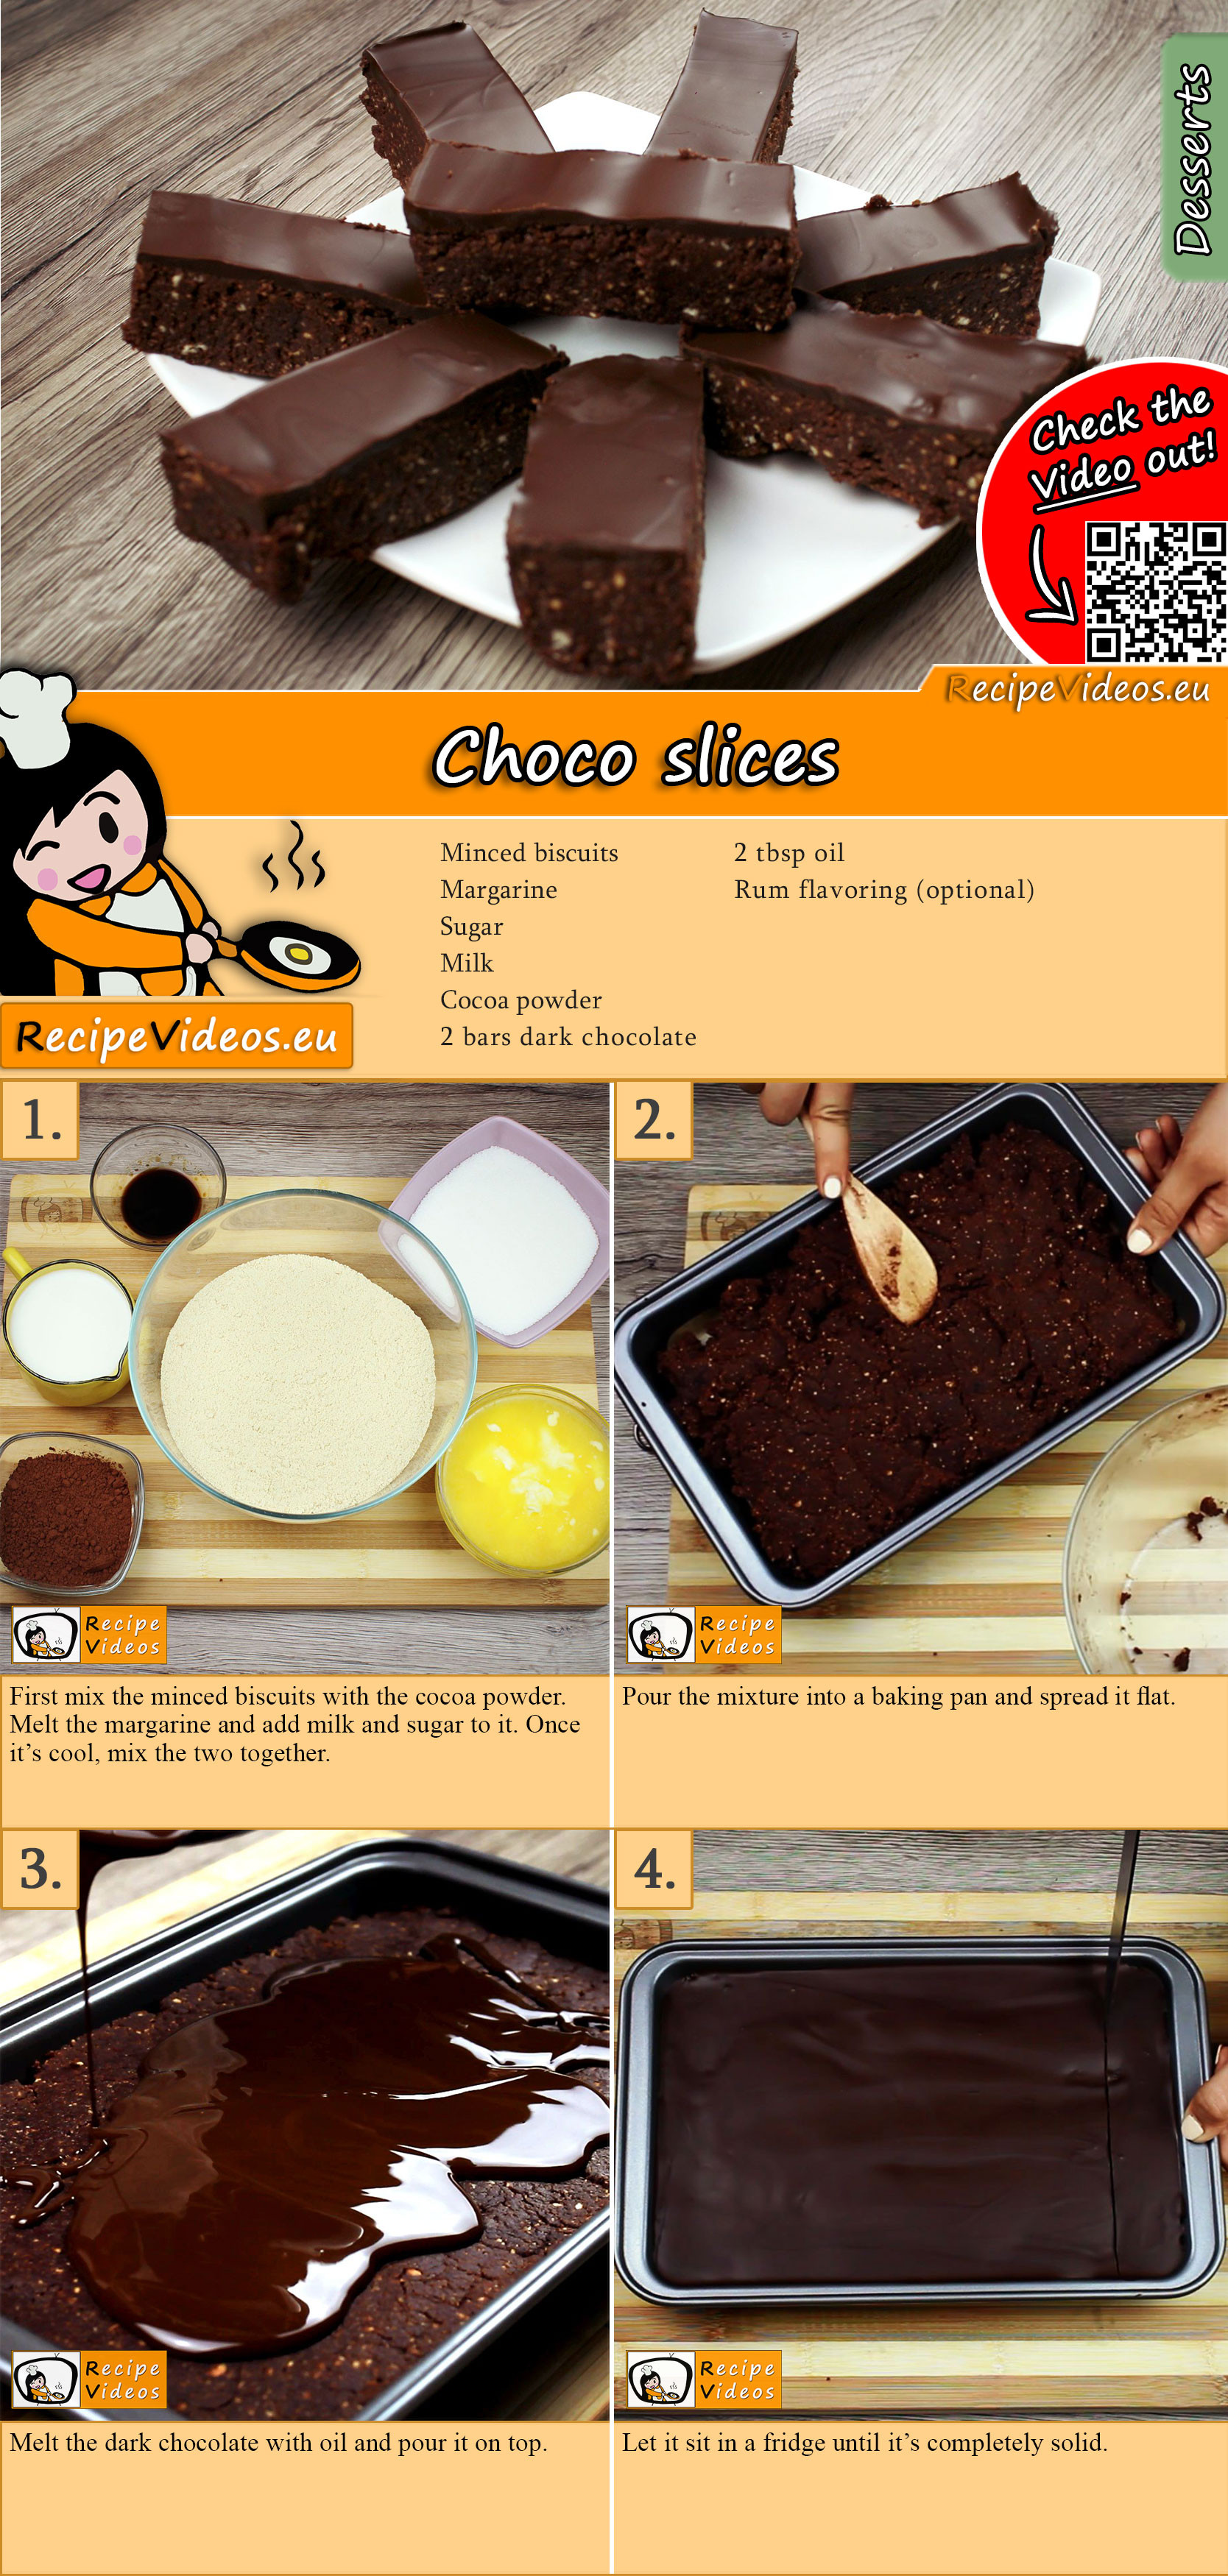 Choco slices recipe with video